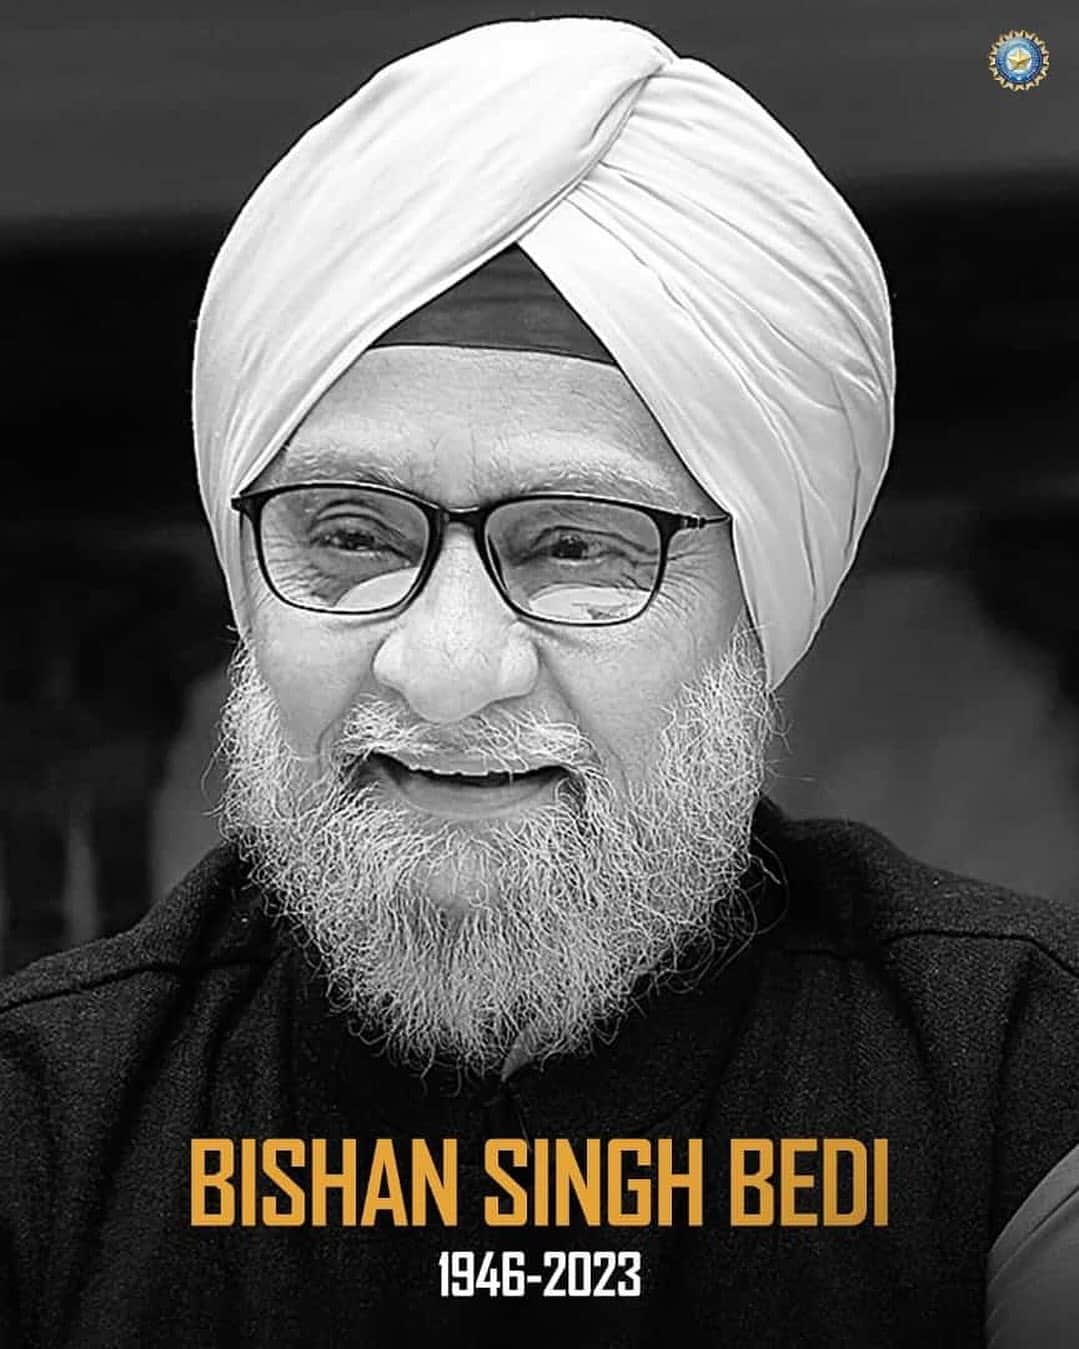 Mary Komのインスタグラム：「Deeply saddened to hear about the demise of the legendary Bishan Singh Bedi Ji. His contributions to the game of cricket were immeasurable. My heartfelt condolences to his family. RIP🙏」